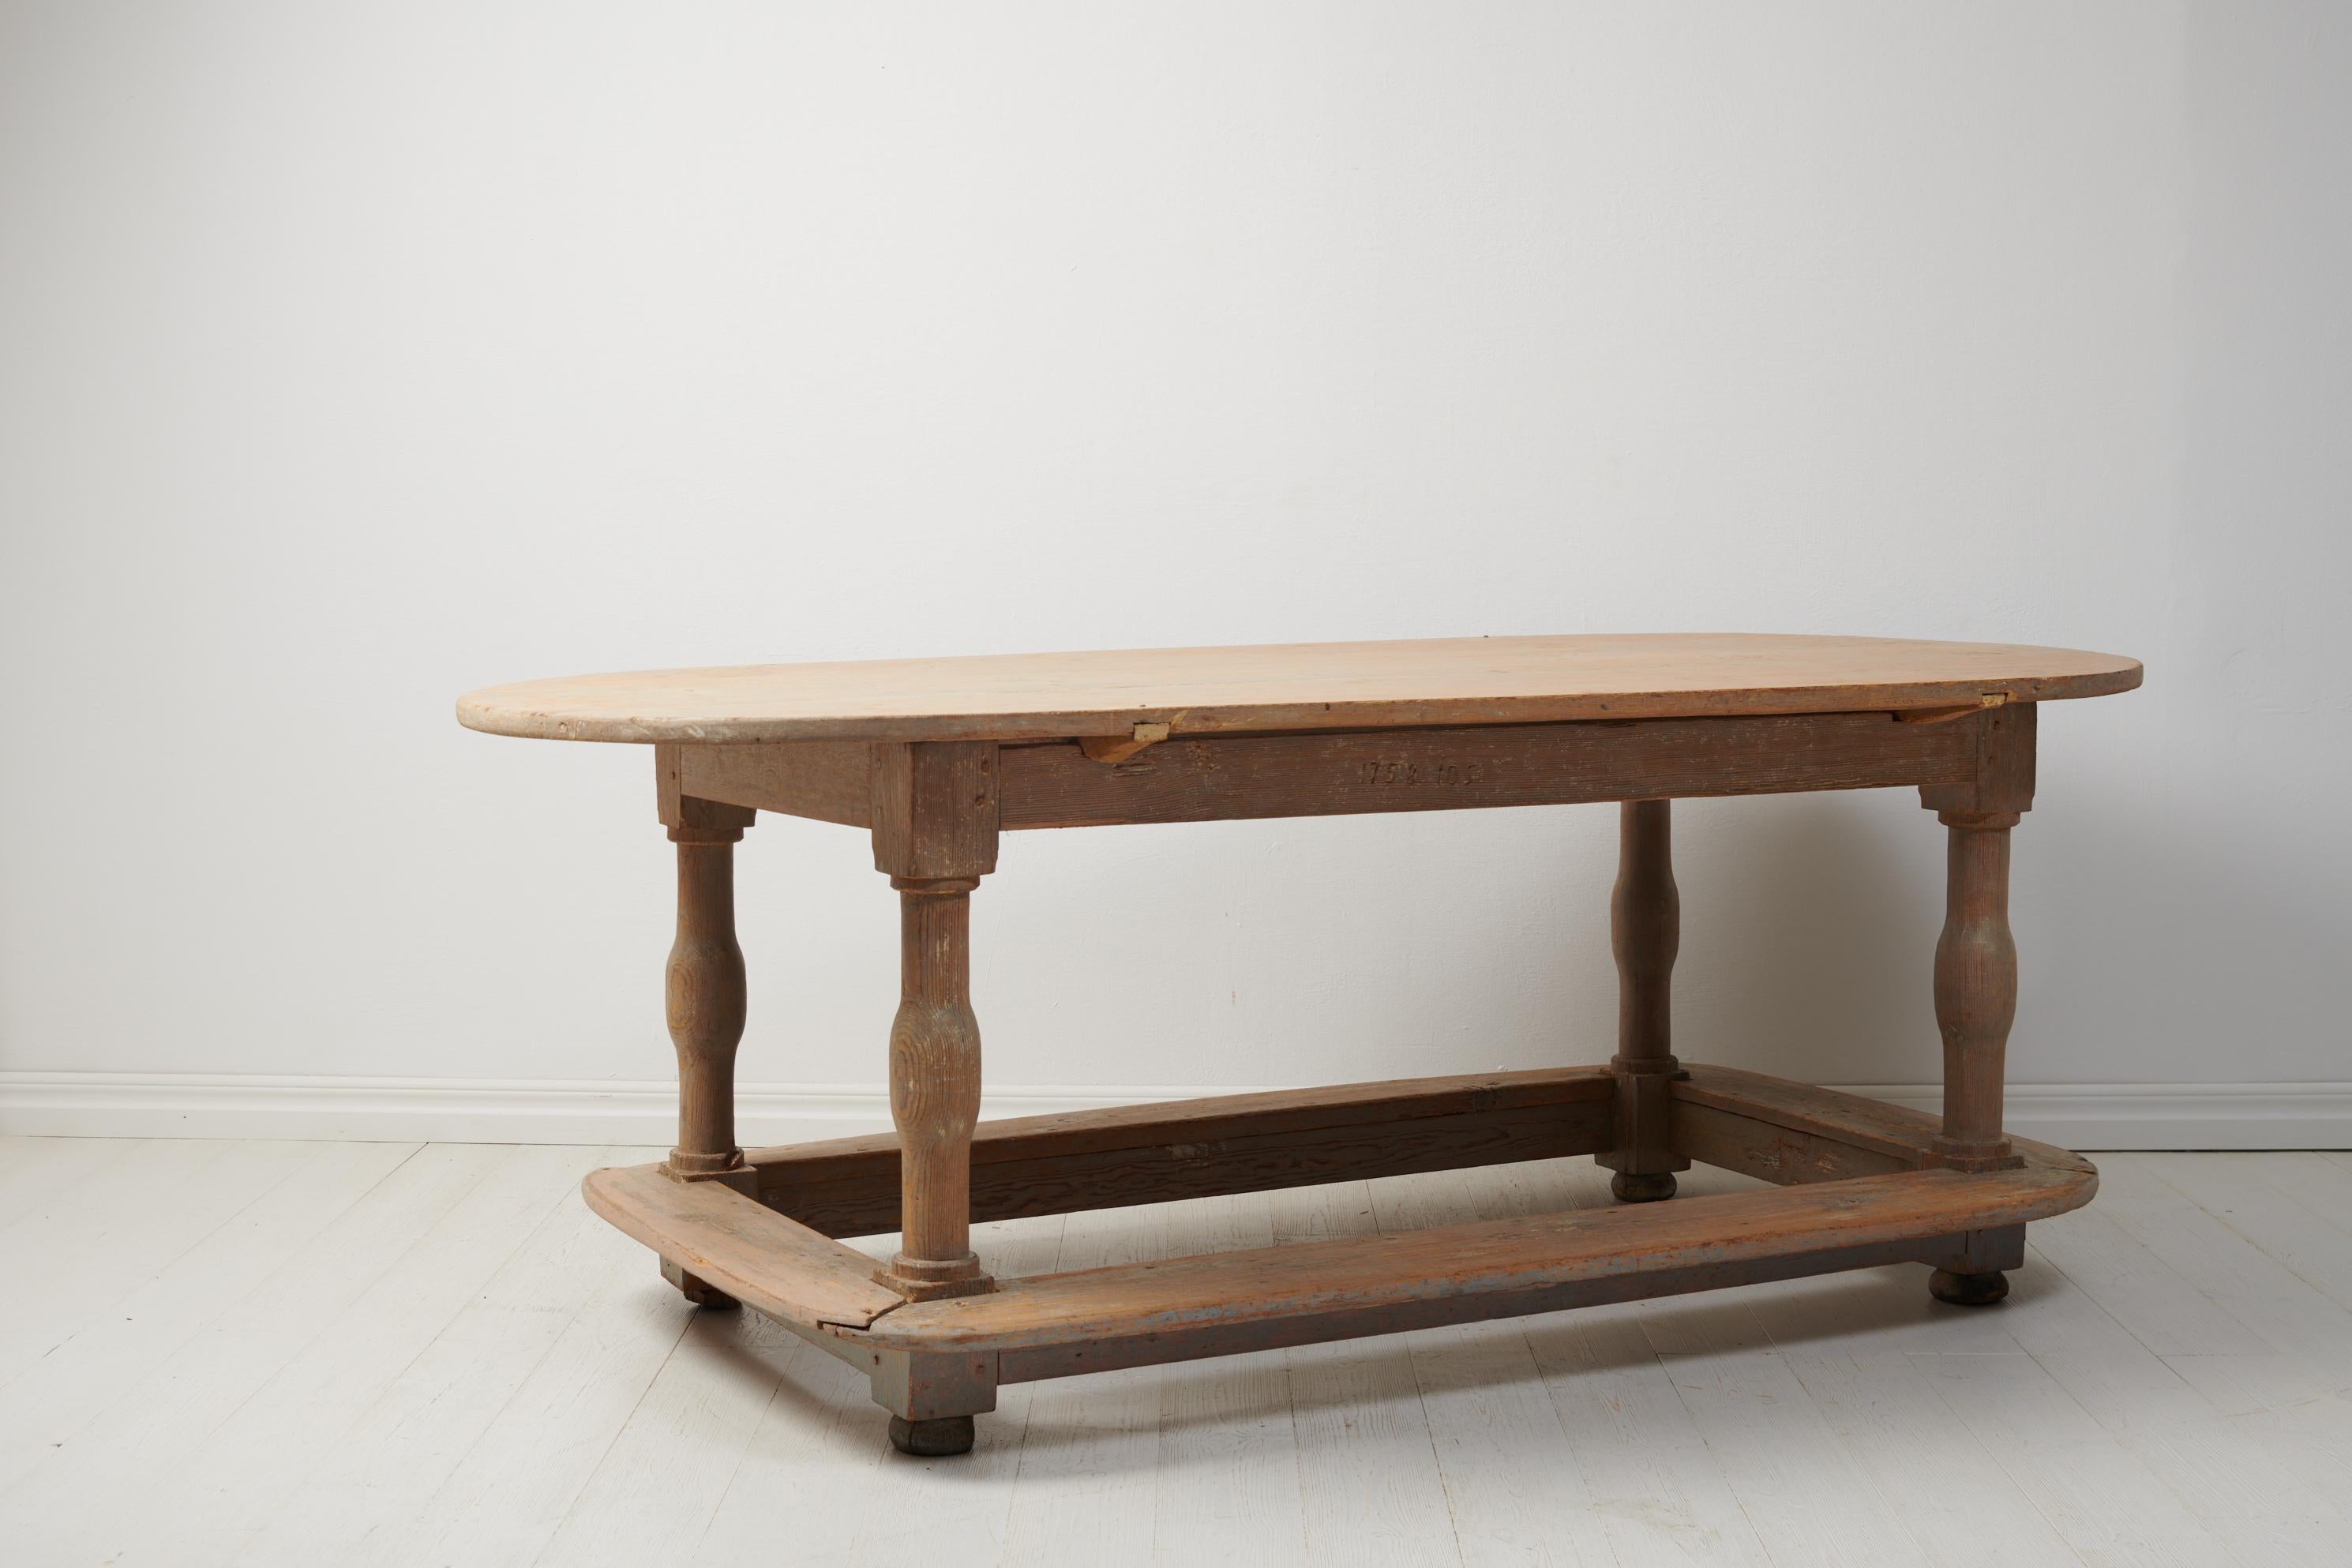 Hand-Crafted Rare Genuine Swedish Pine Baroque Centre Table Dated 1758 For Sale